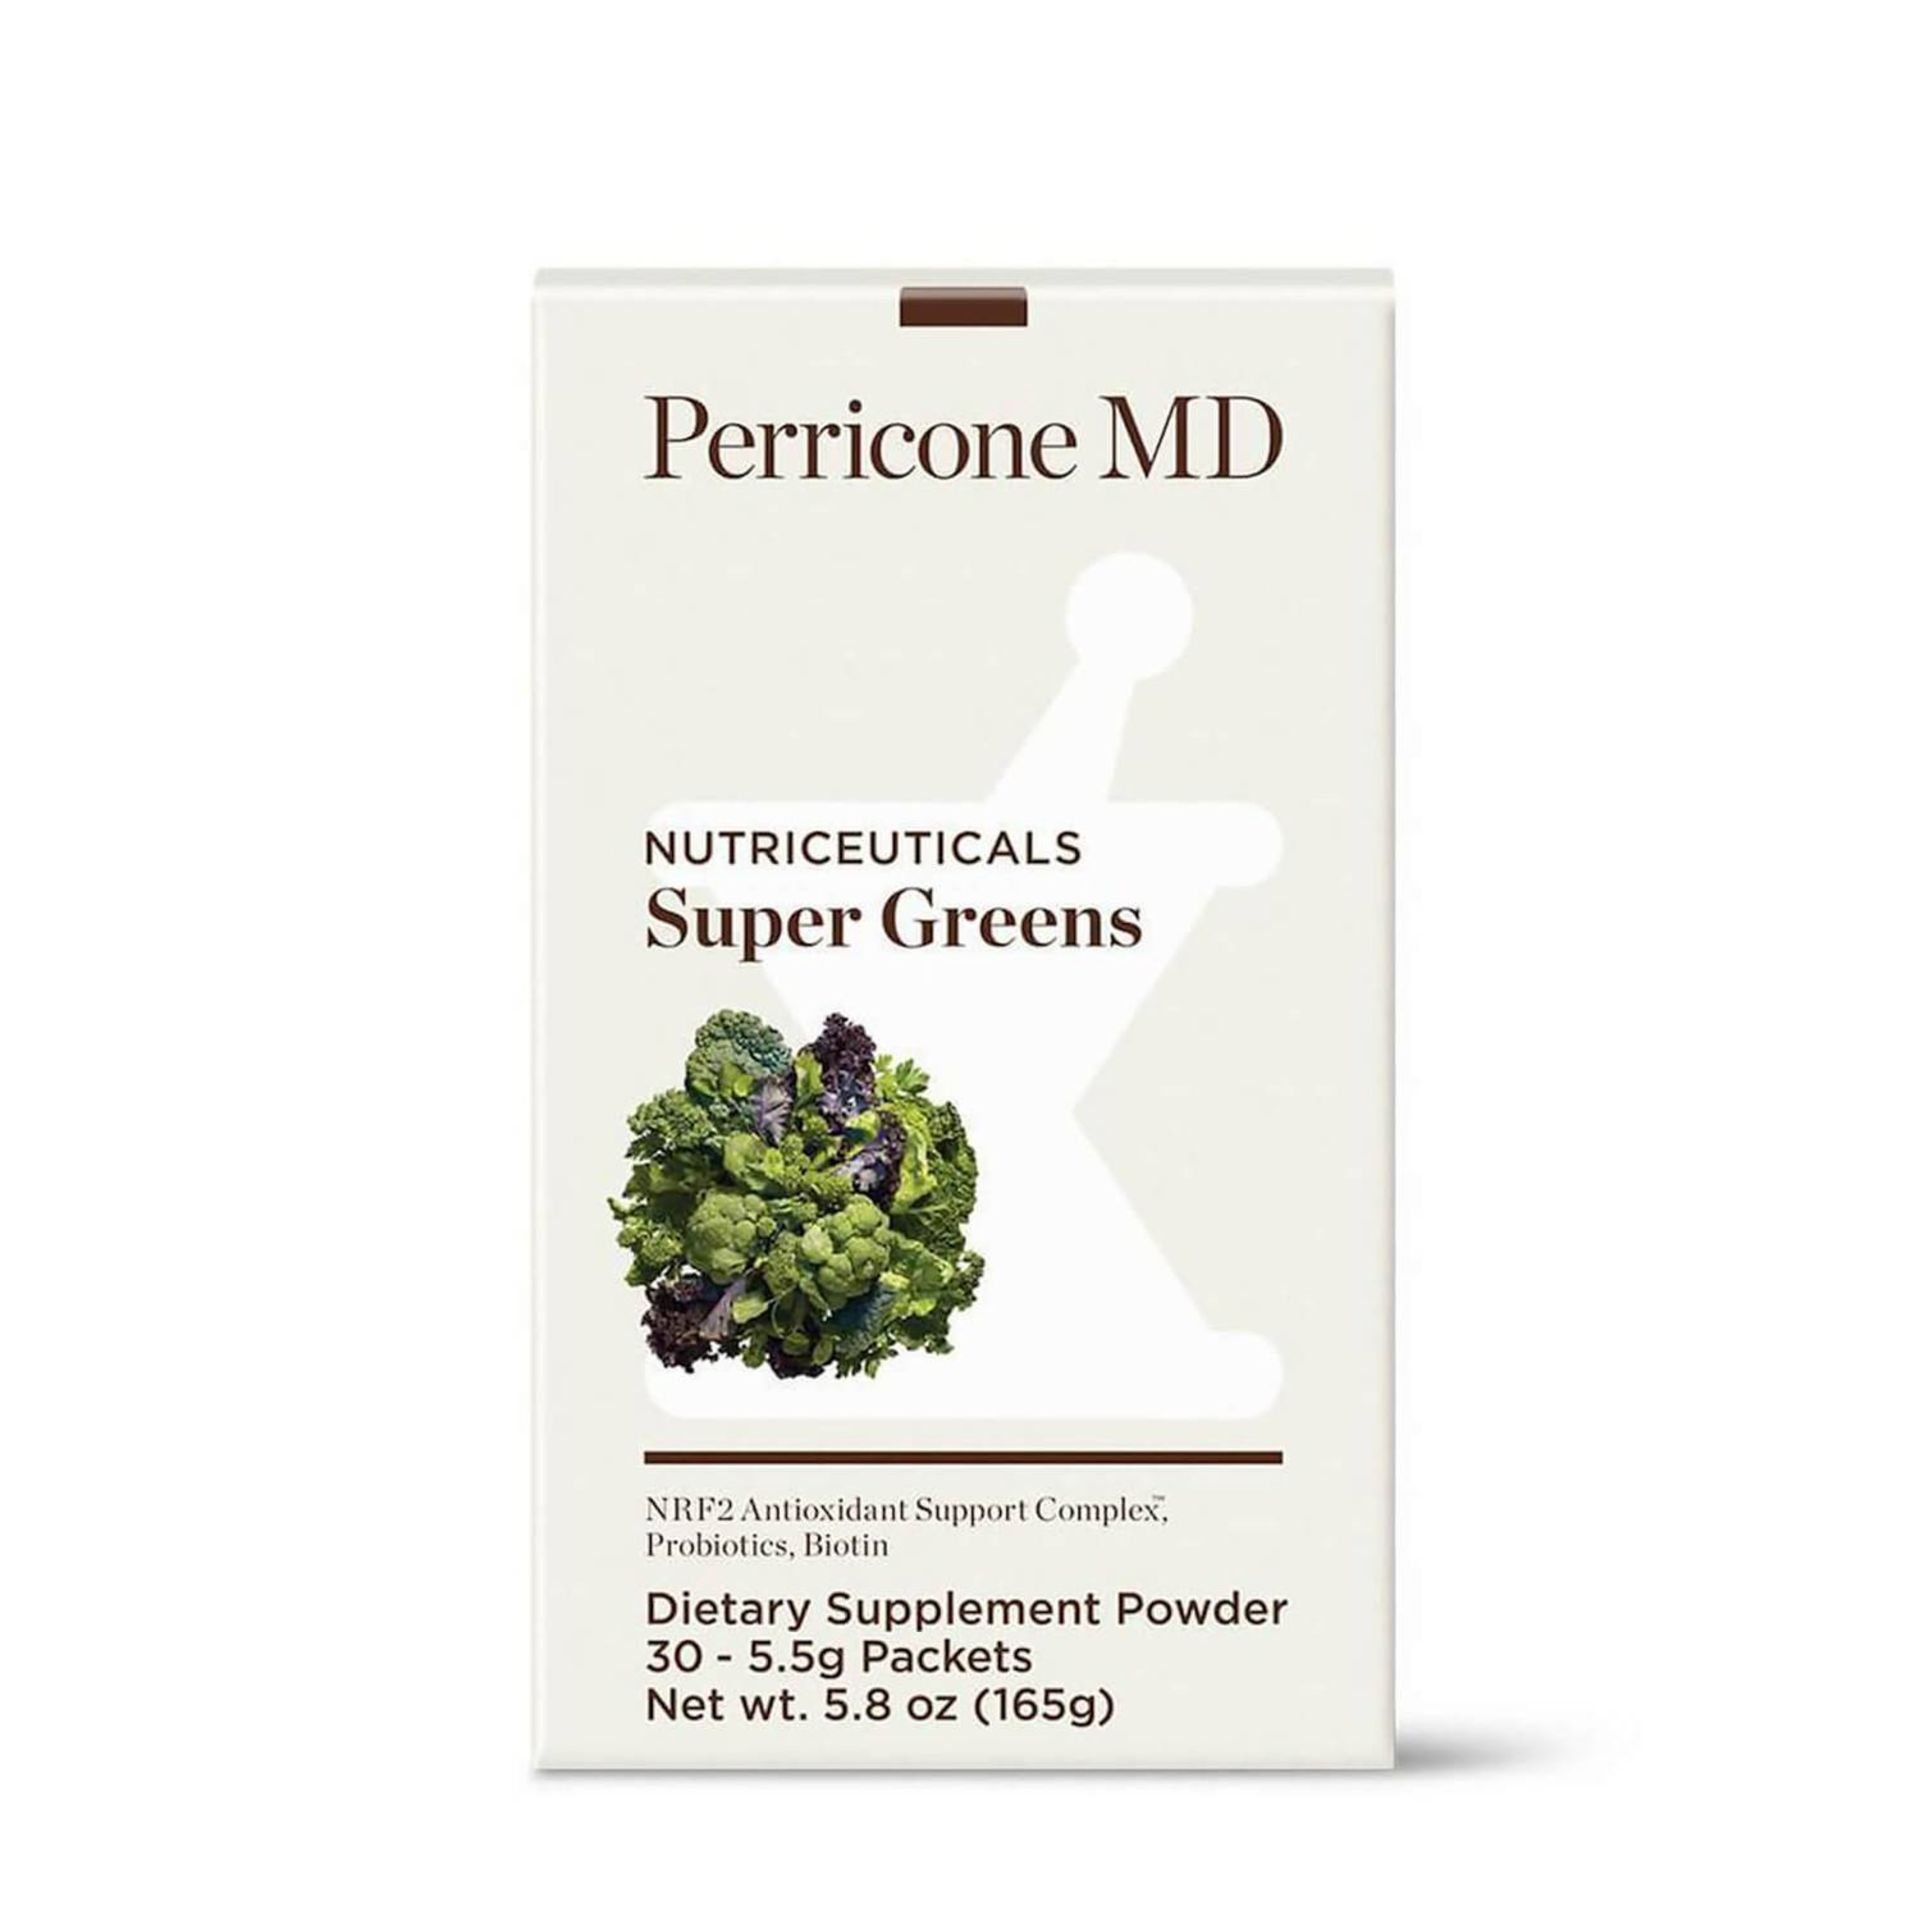 20 X PERRICONE MD SUPER GREENS DIETRY SUPPLEMENT POWDER RRP£1200